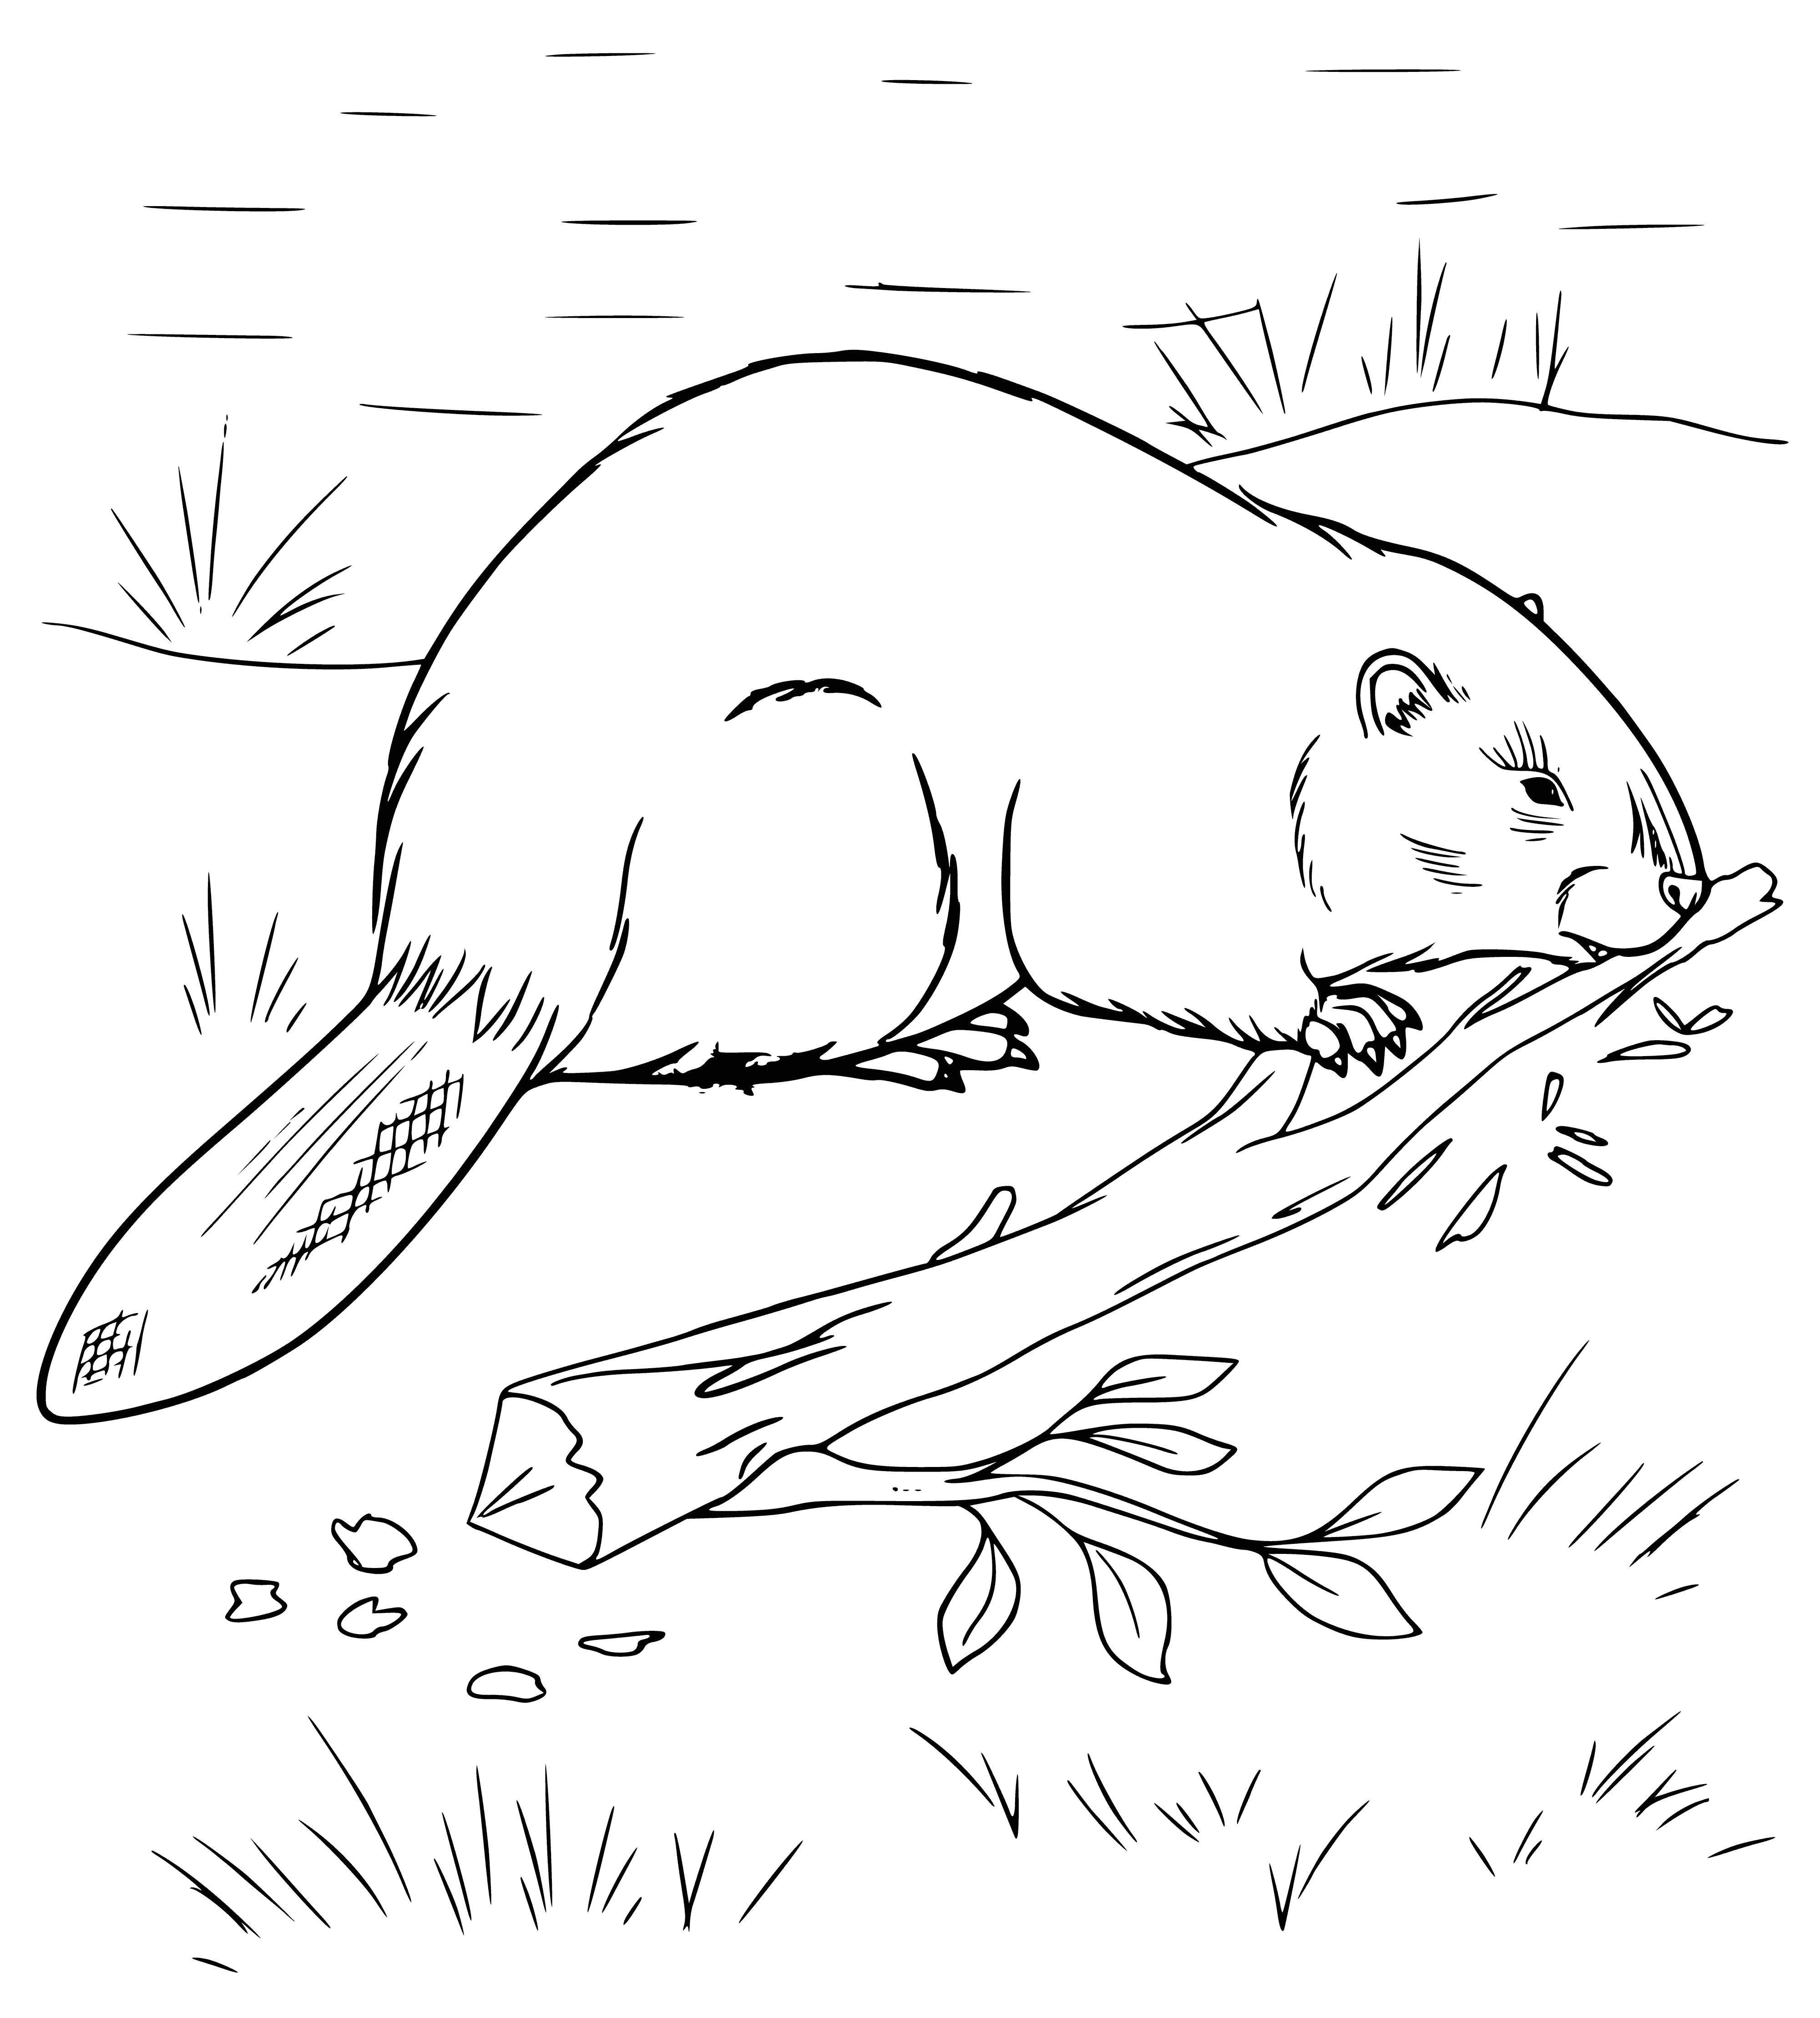 coloring page: Beaver in coloring page is brown, w/long body,flat tail,large sharp teeth; standing on hind legs, small black eyes, and big furry ears.